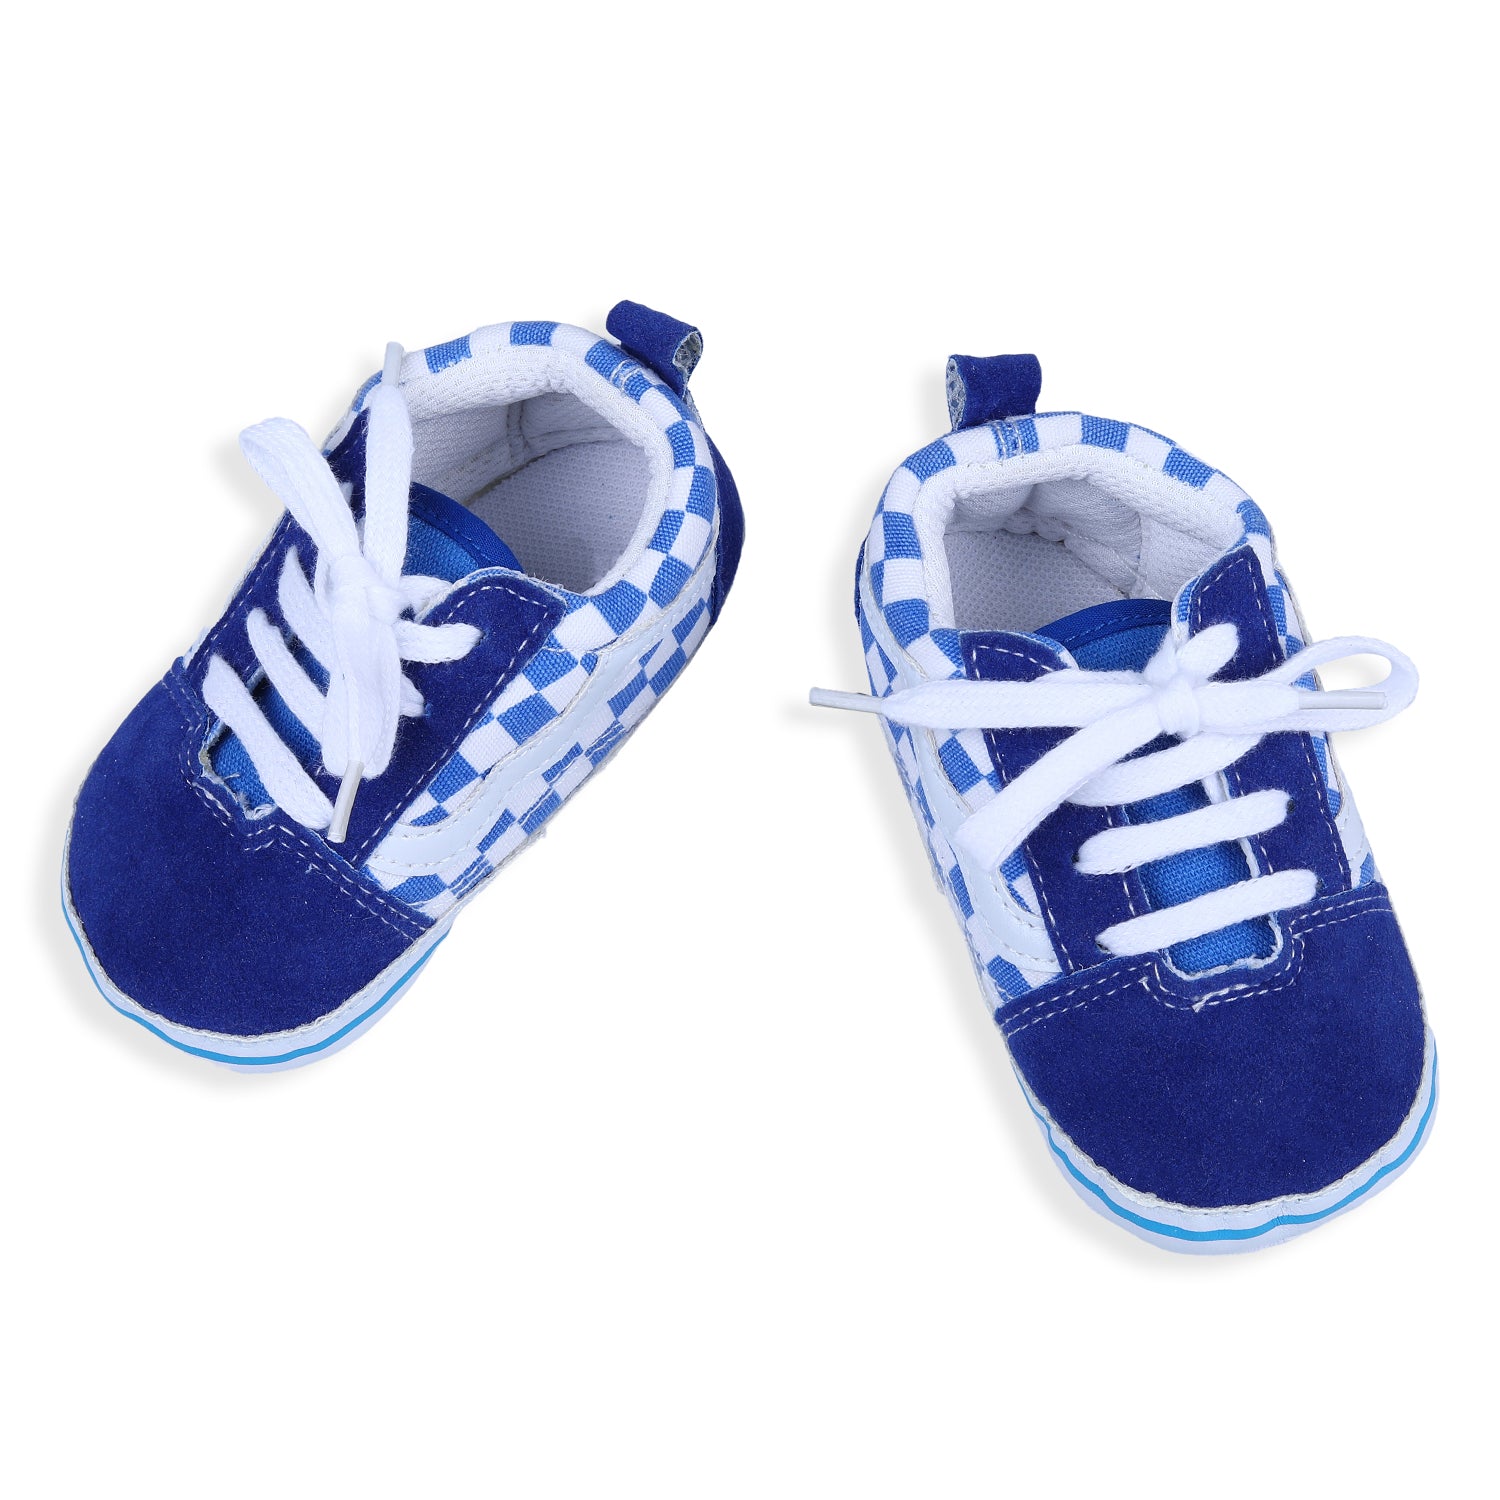 Checkered Lace-Up Casual Soft Sole Anti-Slip Sneaker Booties - Blue